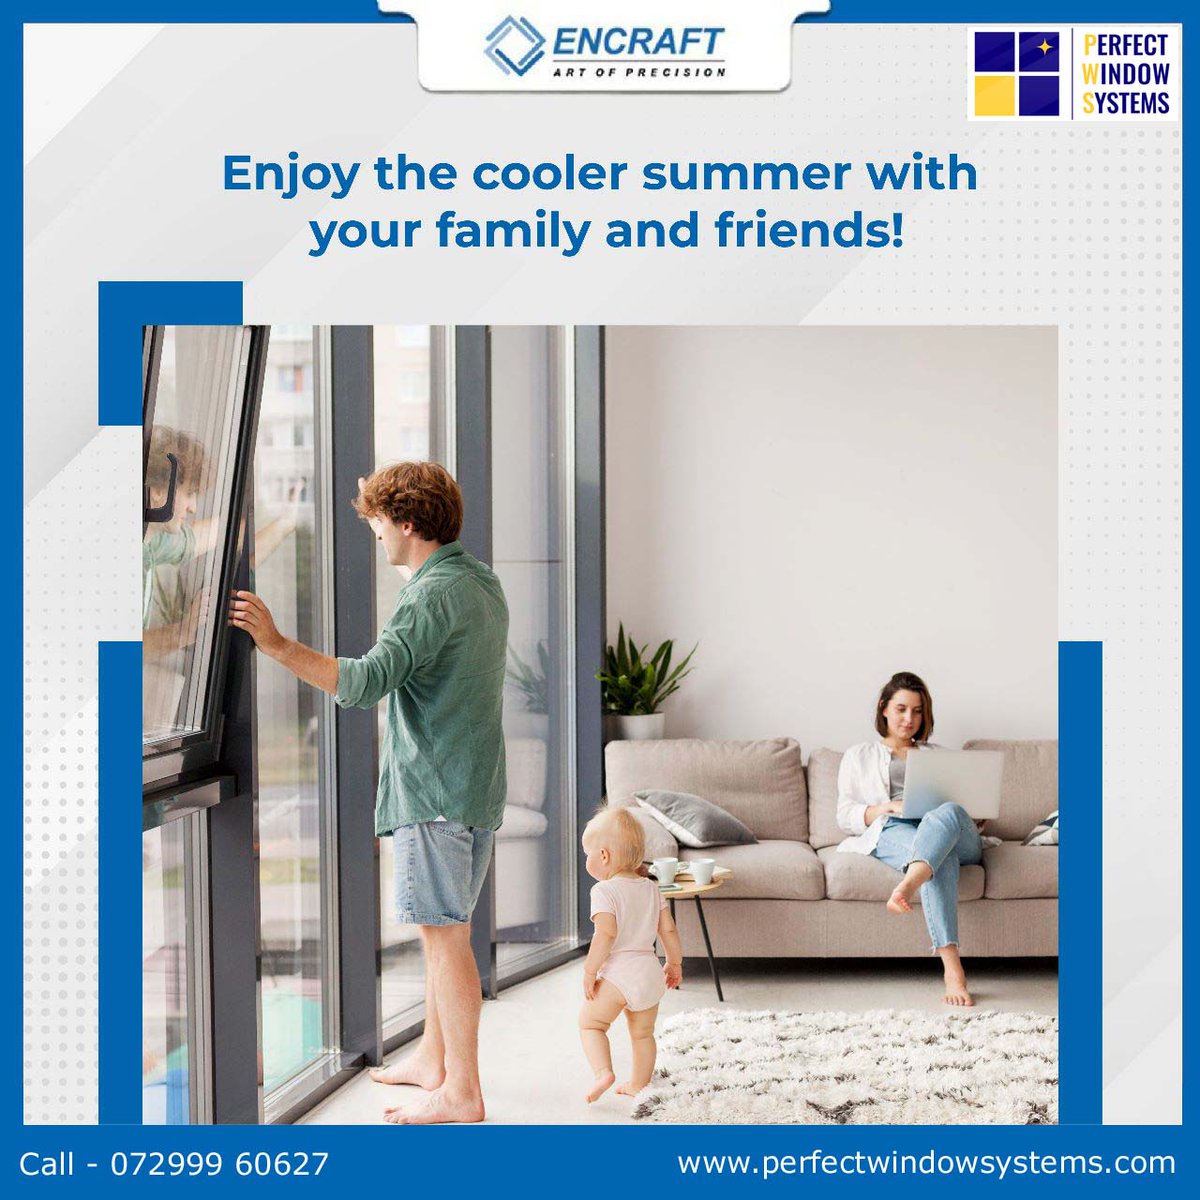 Upgrade your space with Encraft today and start enjoying a cooler summer!

Call Perfect Window Systems +91 72990 27179
perfectwindowsystems.com
#Encraftwindows #Encraftdoors #upvcwindows #upvcdoors #windows #doors #bestupvcwindow #Aluminiumdoors #Aluminiumwindows